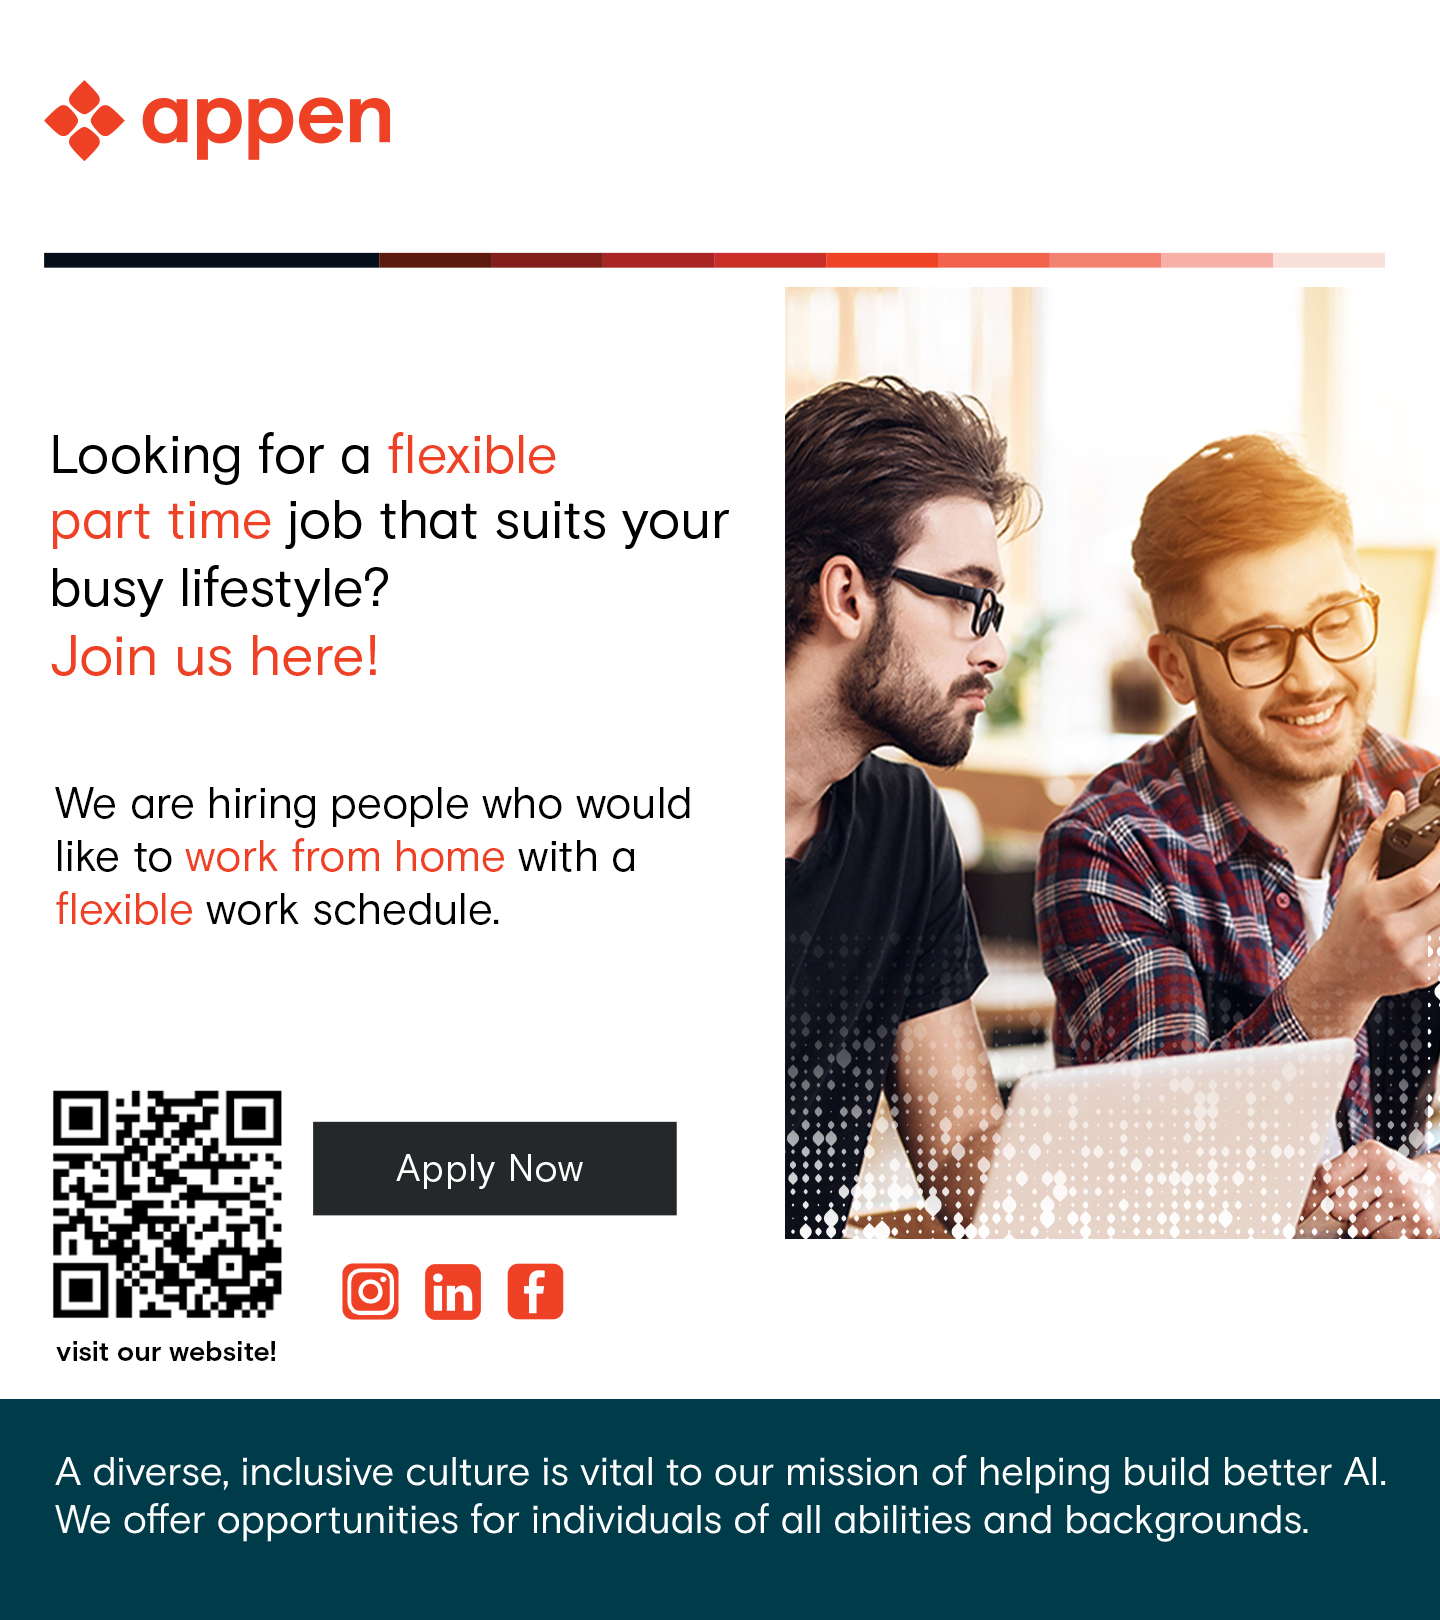 &lt;&gt; appen

 

Looking for a flexible

part time job that suits your
busy lifestyle?

Join us here!

We are hiring people who would
like to work from home with a
flexible work schedule.

   

visit our website!

A diverse, inclusive culture is vital to our mission of helping build better Al.

We offer opportunities for individuals of all abilities and backgrounds.